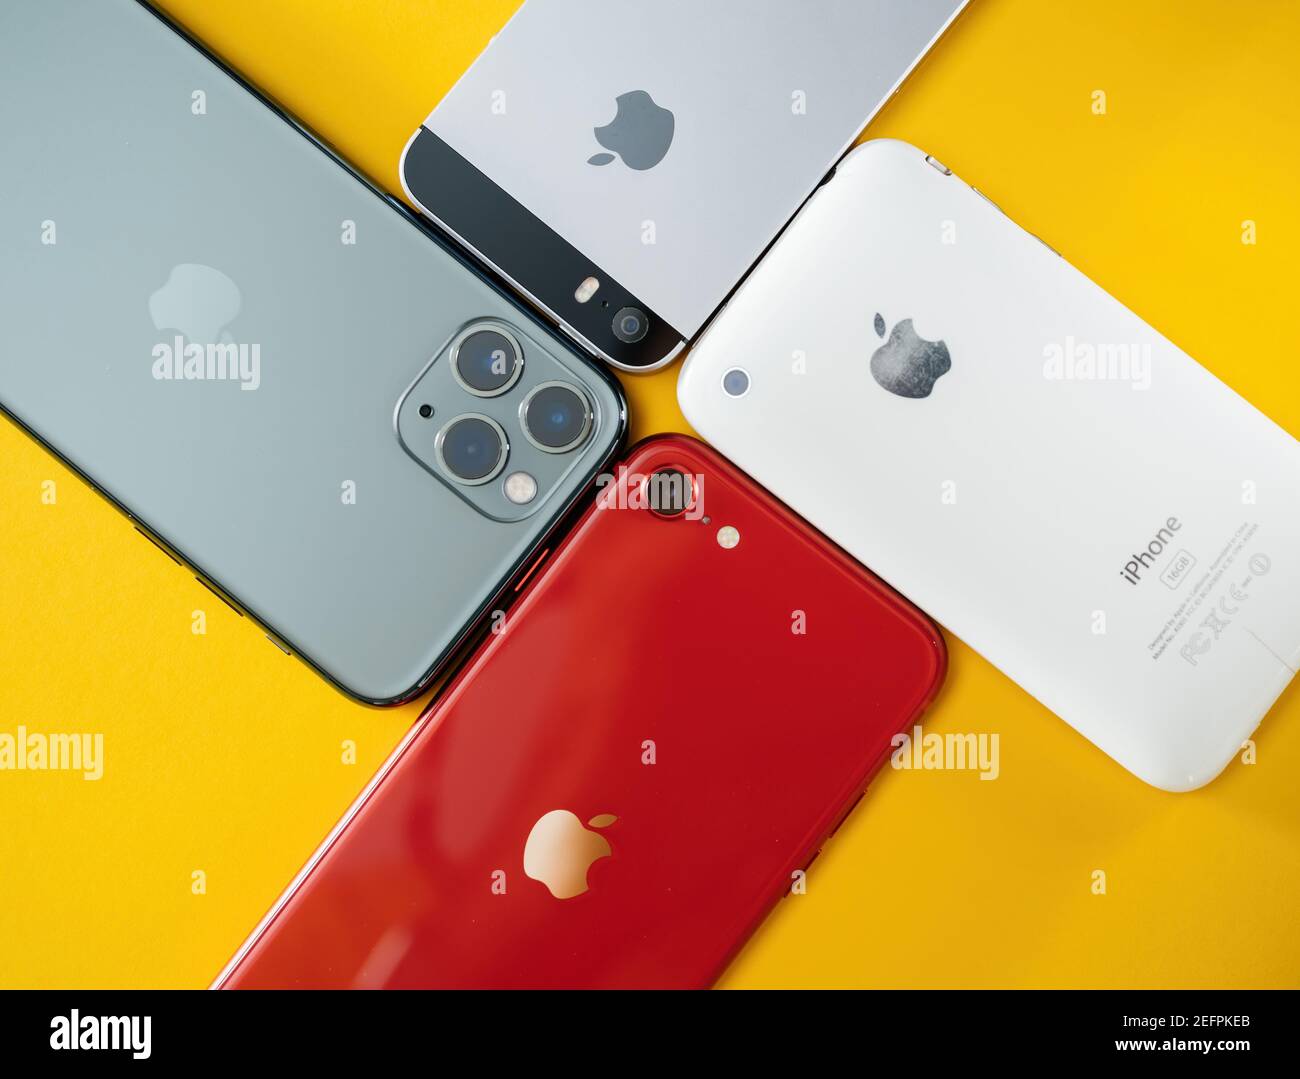 PAris, France - Apr 26, 2020: View from above of four mobile Phone manufactured by Apple Computers with 3GS, Se, SE second generation and 11 Pro - isolated on yellow background Stock Photo